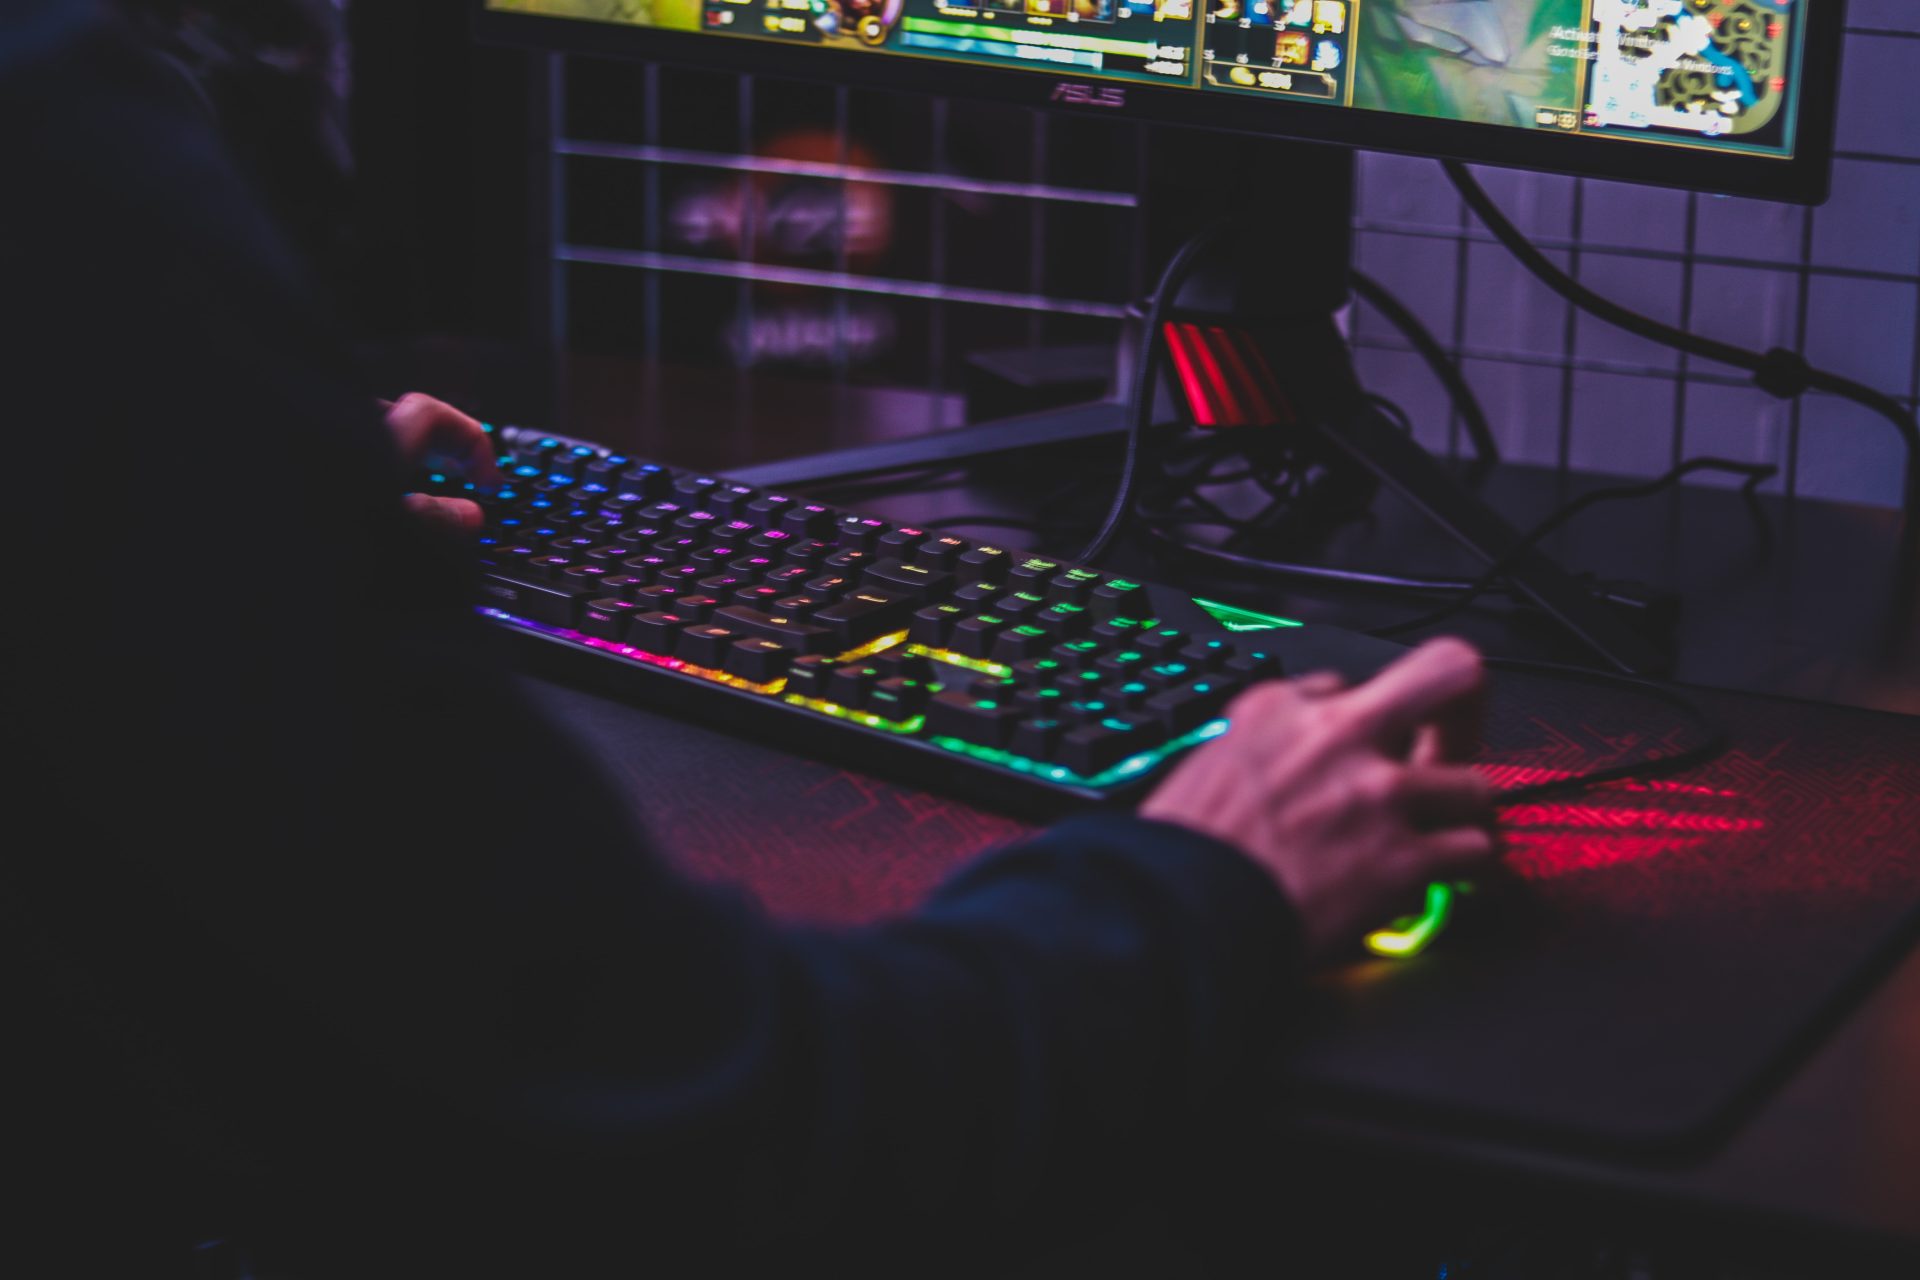 Photo of hands using an RGB keyboard and mouse for playing PC games